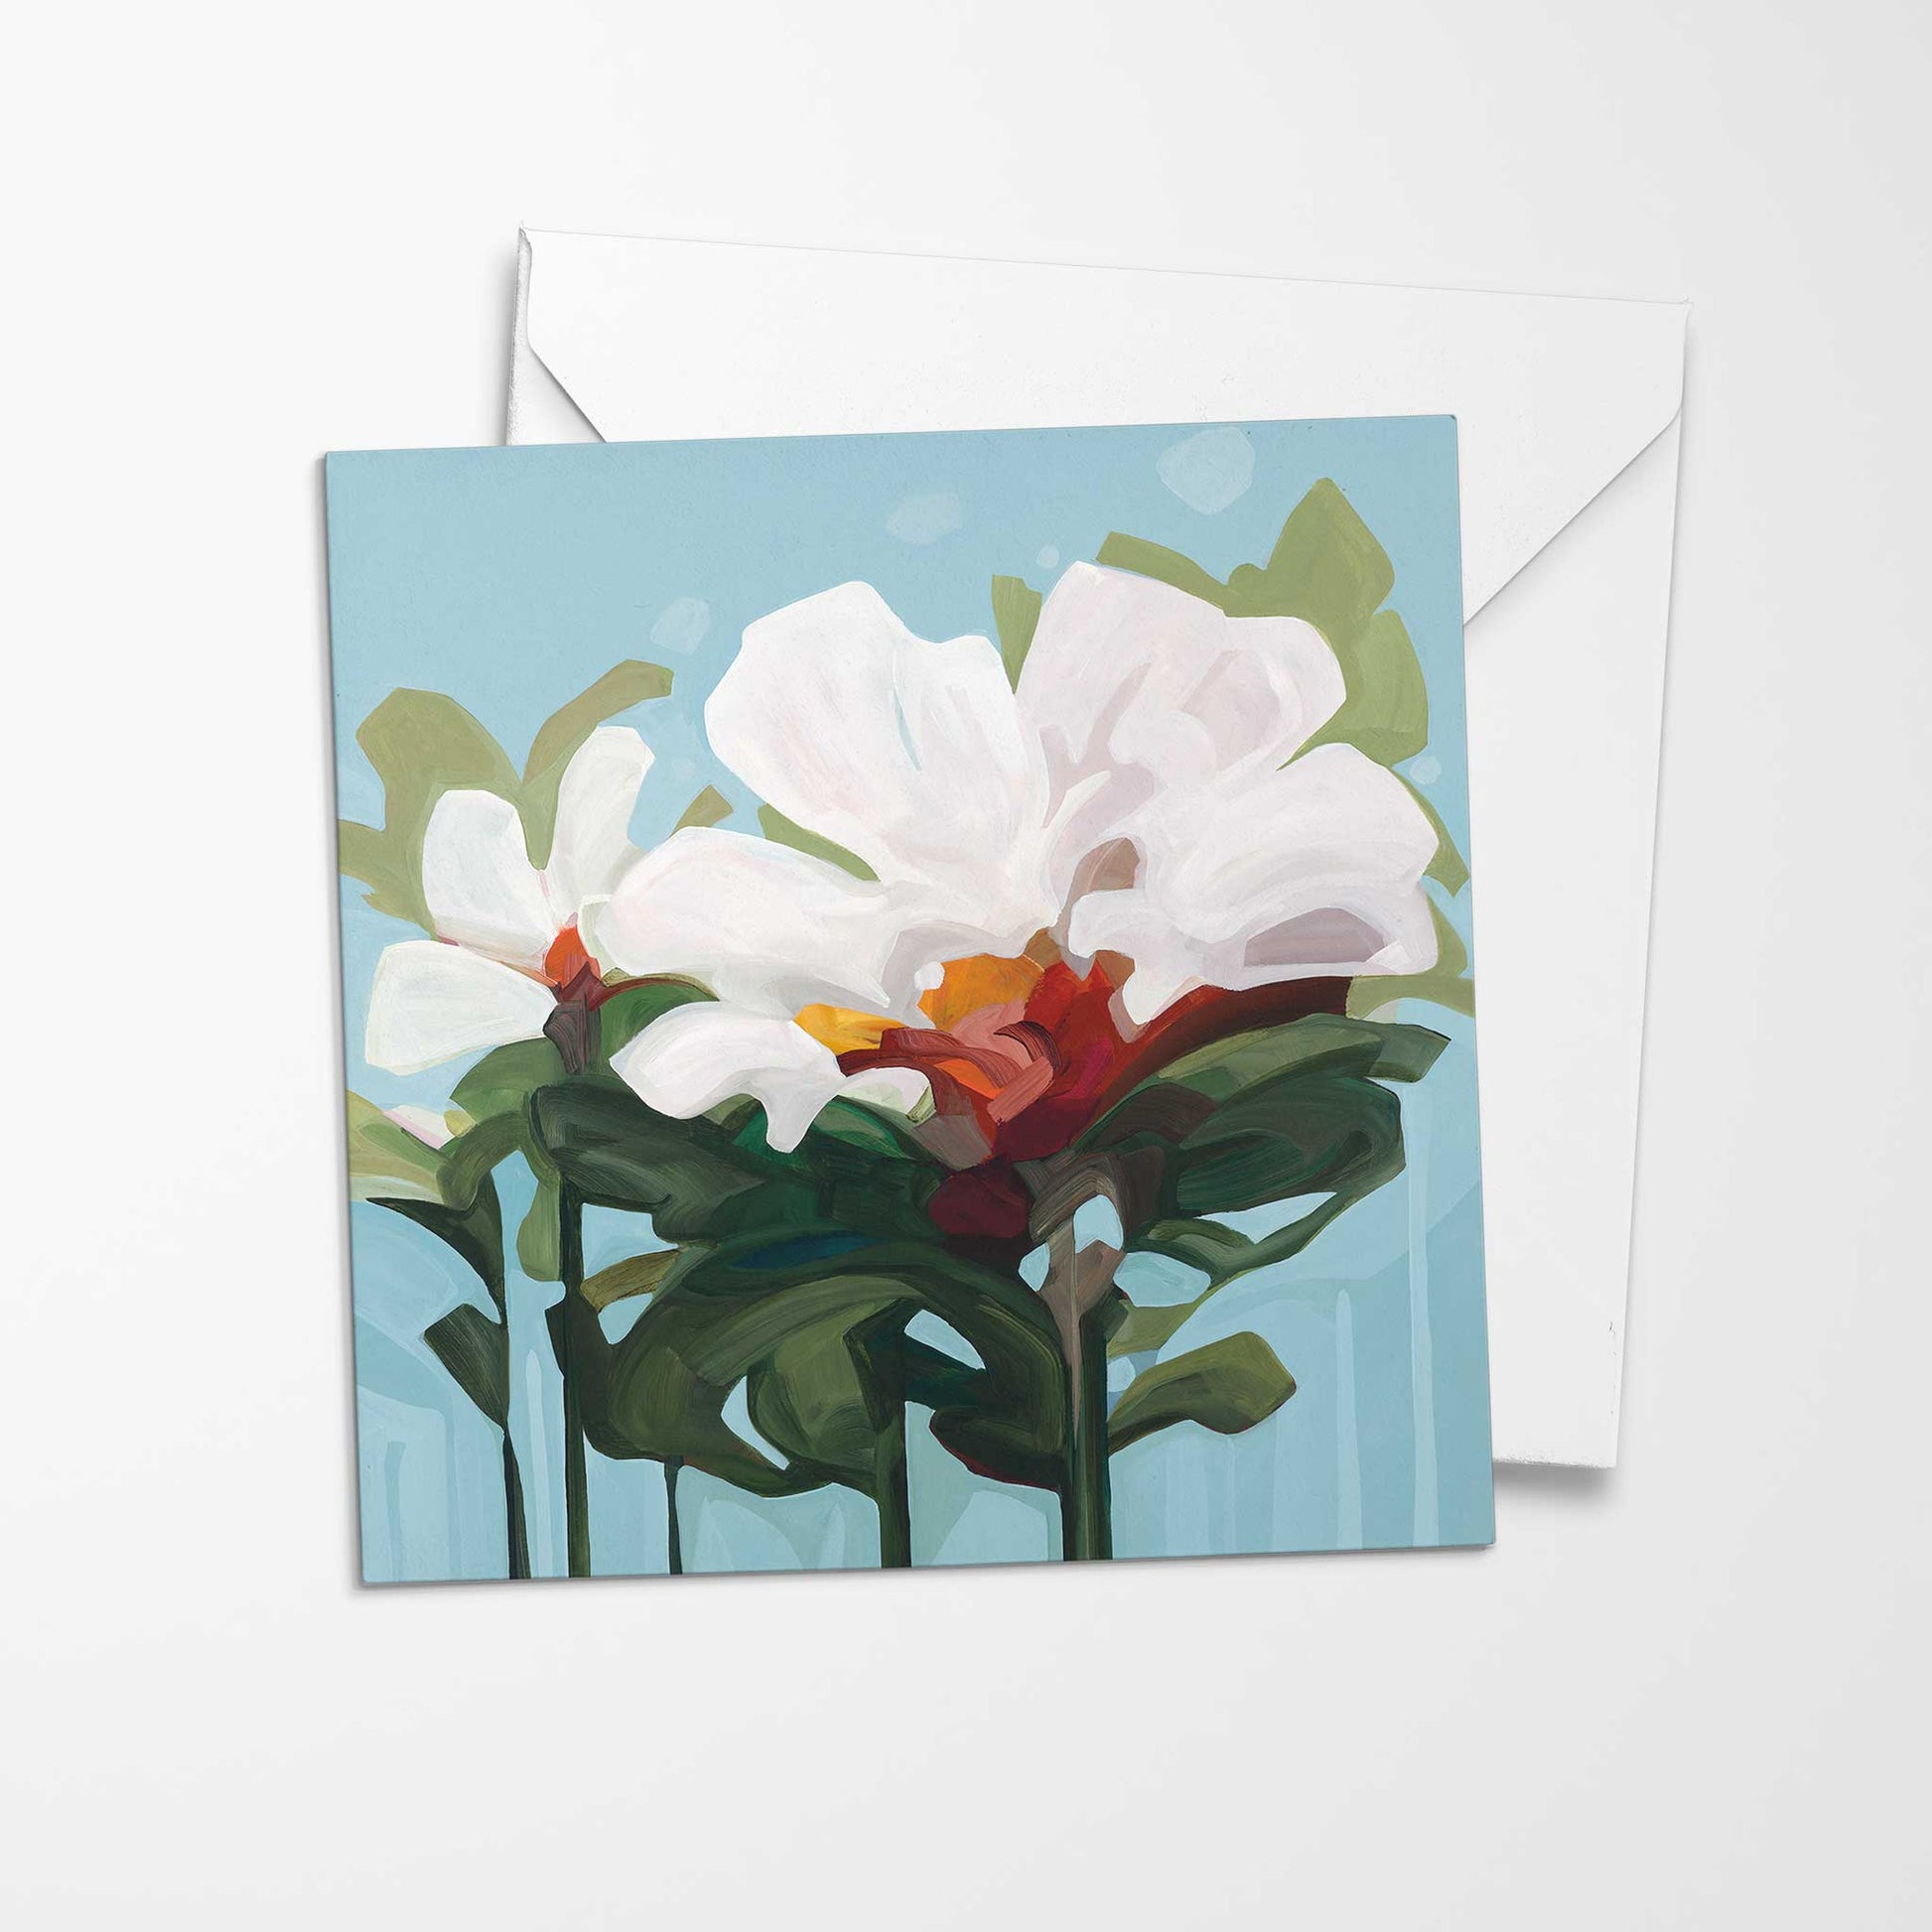 blank art card with white envelope from floral art card collection by Canadinan artist Susannah Bleasby